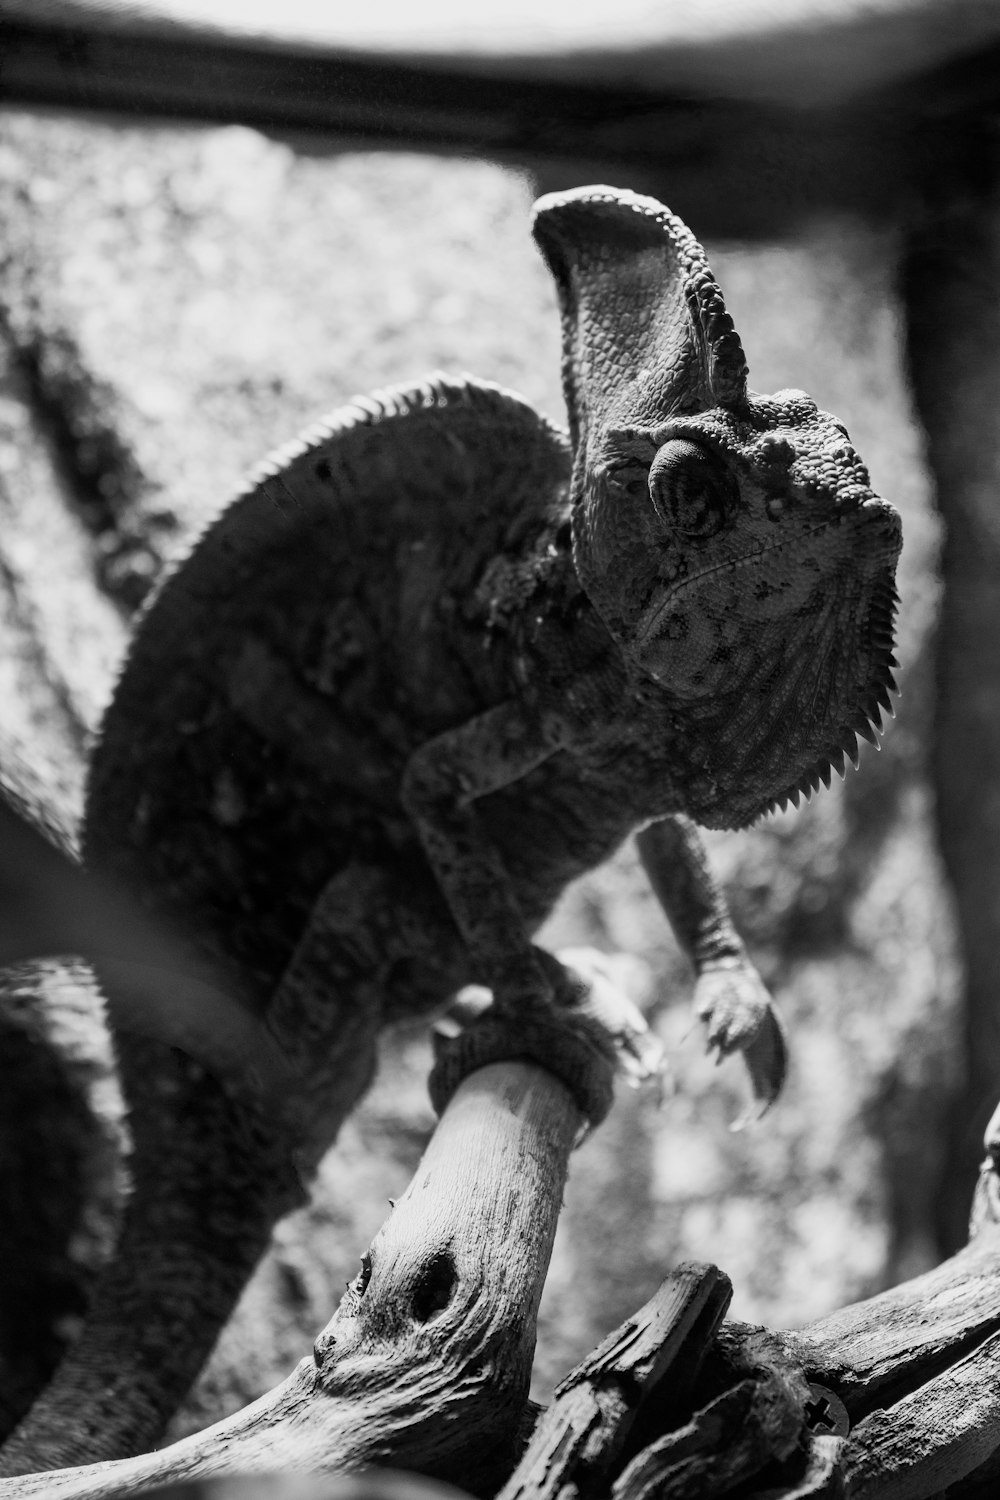 a chamelon climbing a tree branch in a black and white photo